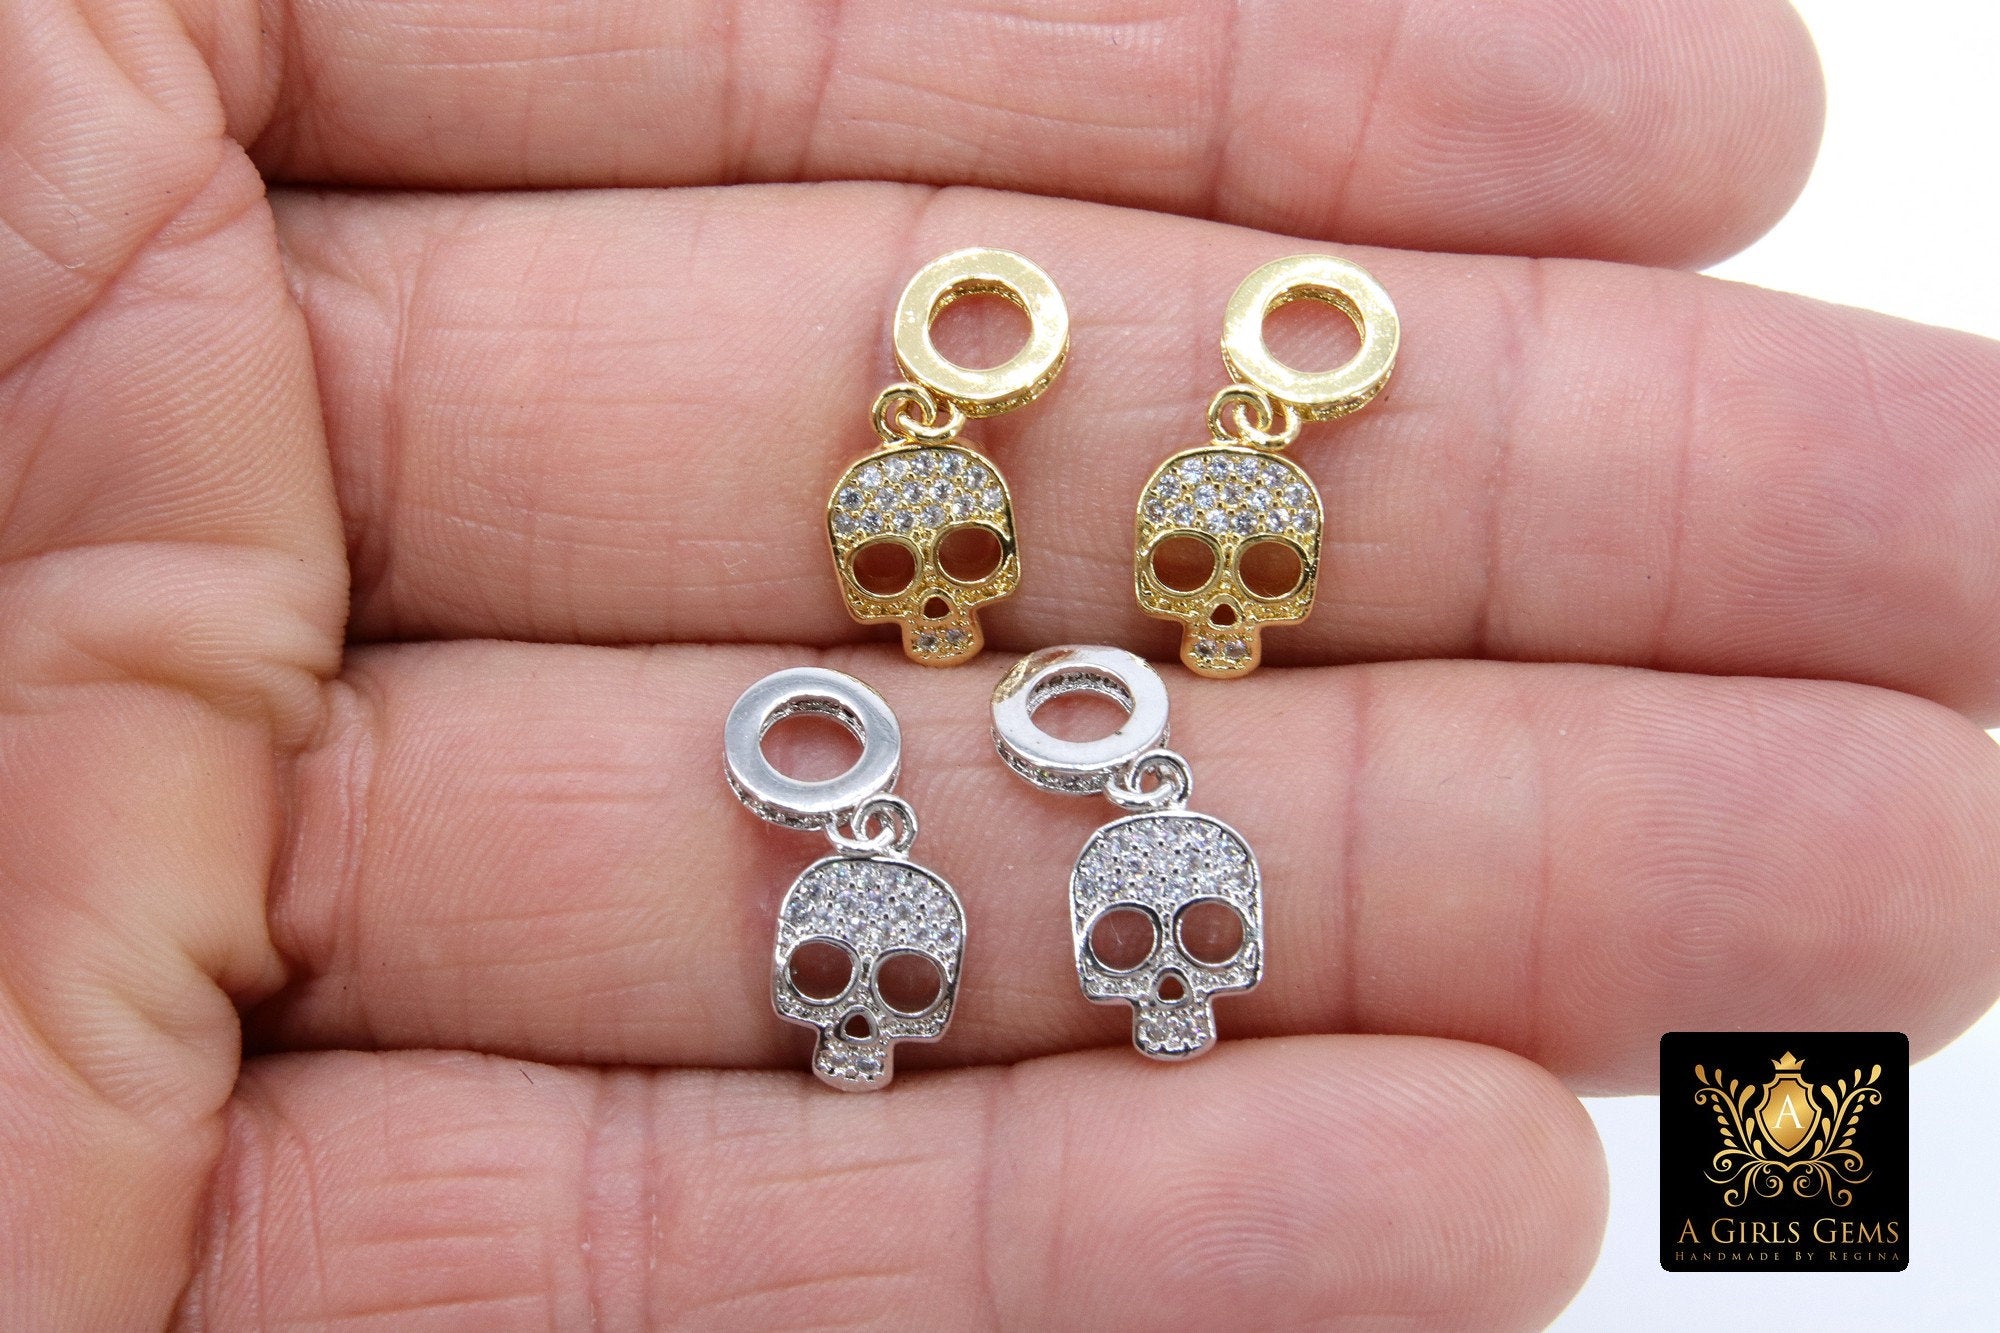 CZ Gold Skull Charm with Rings, Silver Skeleton Slide Spacer Circle Silver #2617, Large Hole Pandora Dangle - A Girls Gems